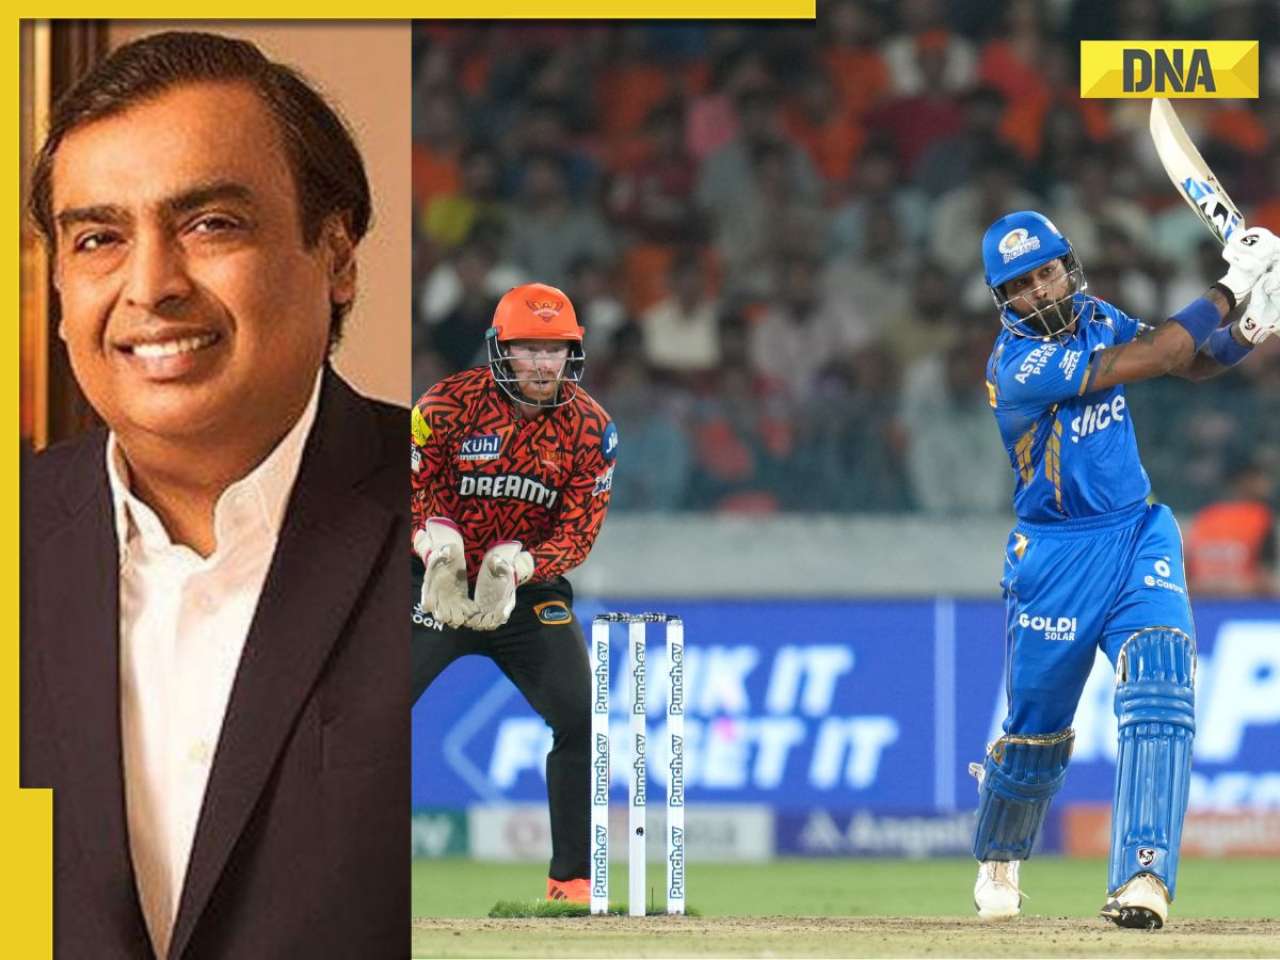 Mukesh Ambani’s firm gets major relief from Delhi High Court, IPL streaming restricted for…